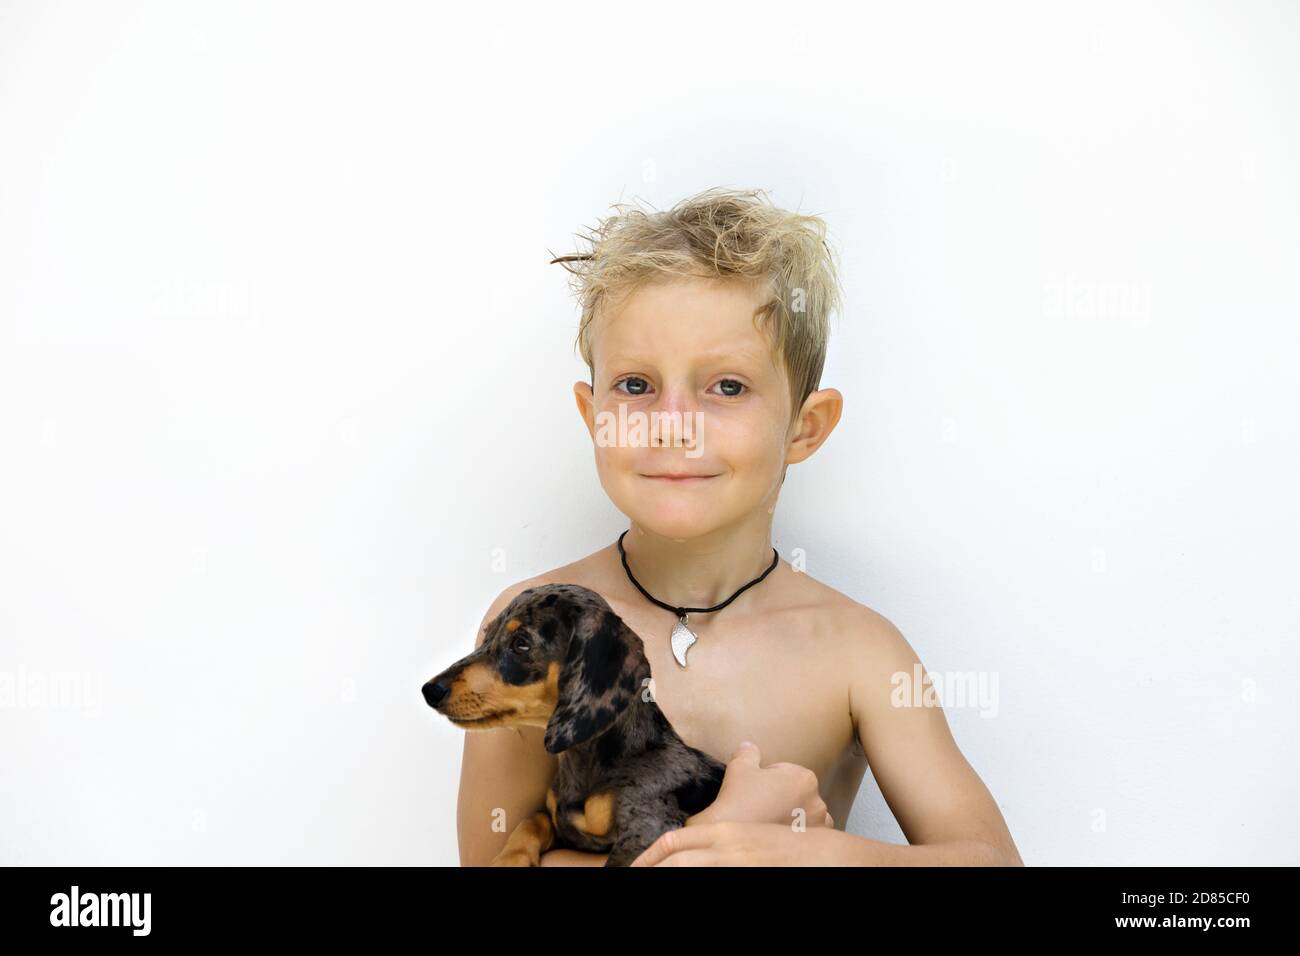 Funny portrait of little child embracing dachshund puppy after outdoor  playing. White background. Popular dog breeds, outdoor activity and fun  games w Stock Photo - Alamy